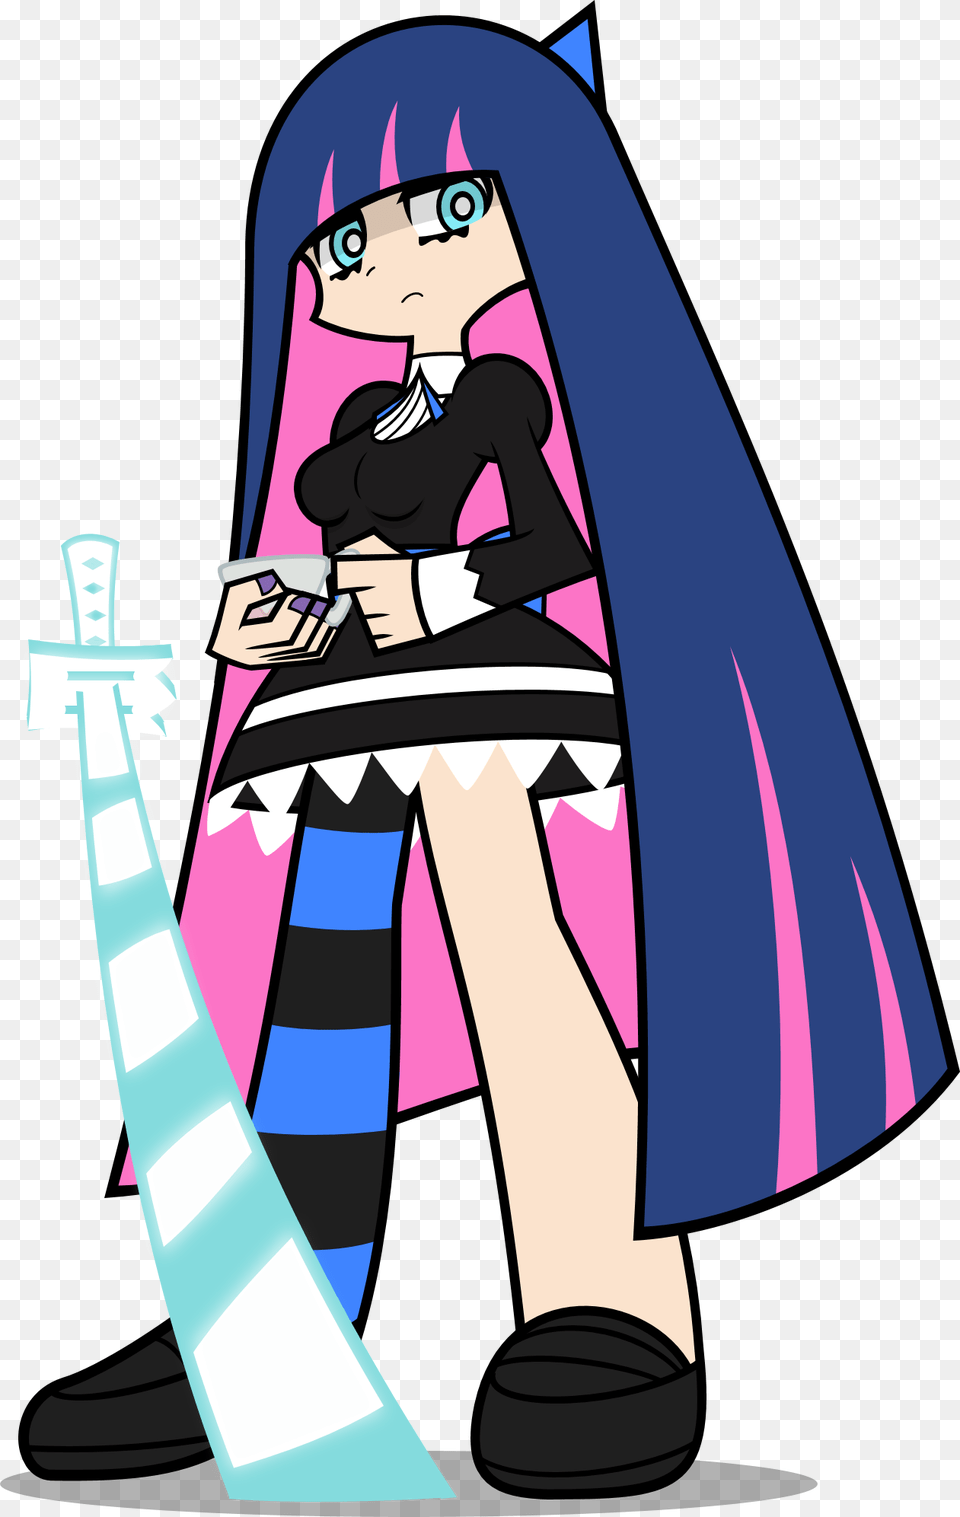 Stocking Anarchy By Zacatron94 Stocking Anarchy Official Art, Book, Comics, Publication, Manga Free Png Download